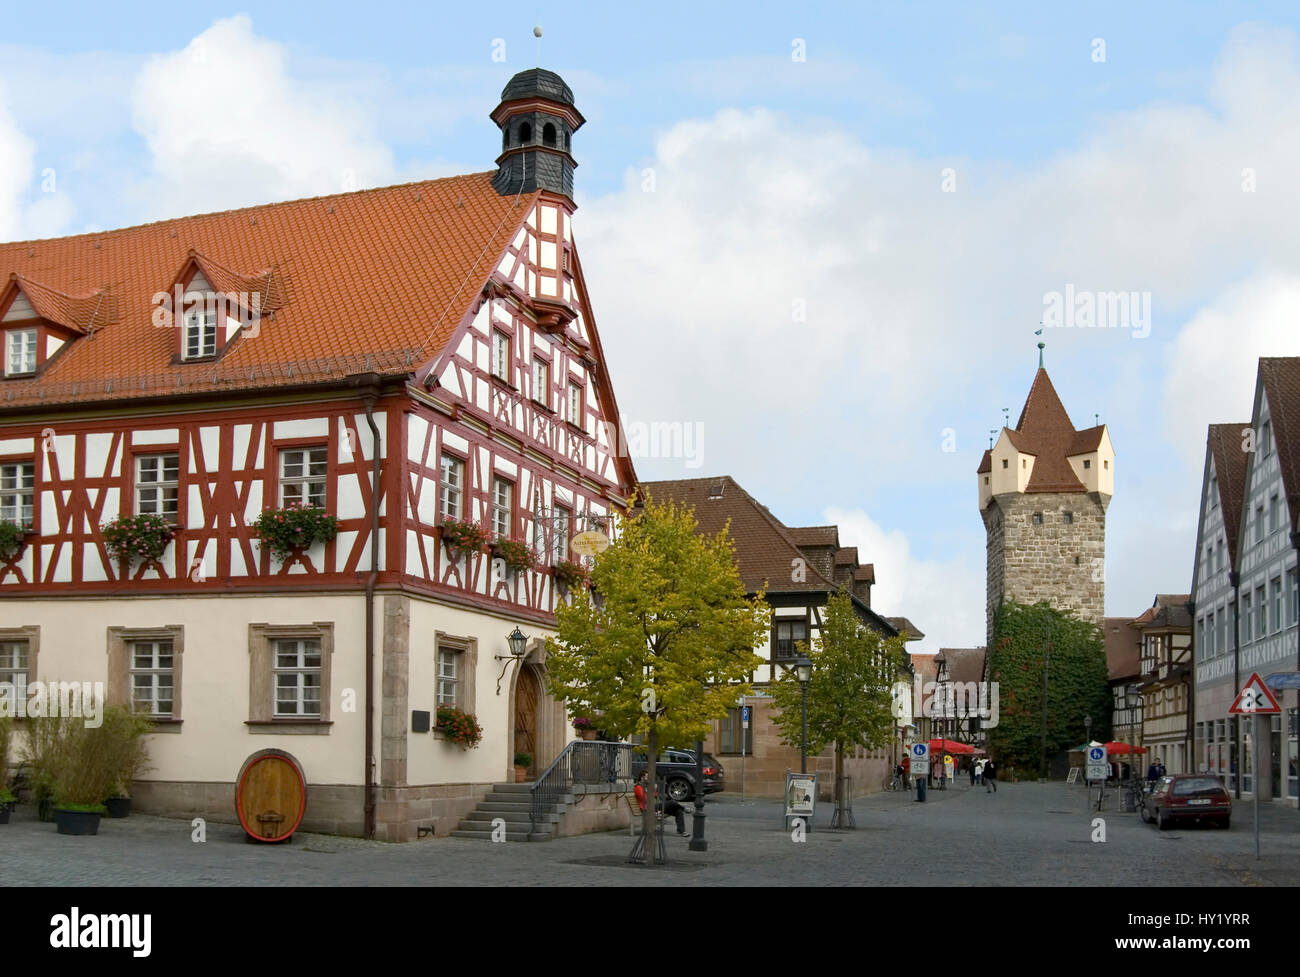 Herzogenaurach hi-res stock photography and images - Alamy